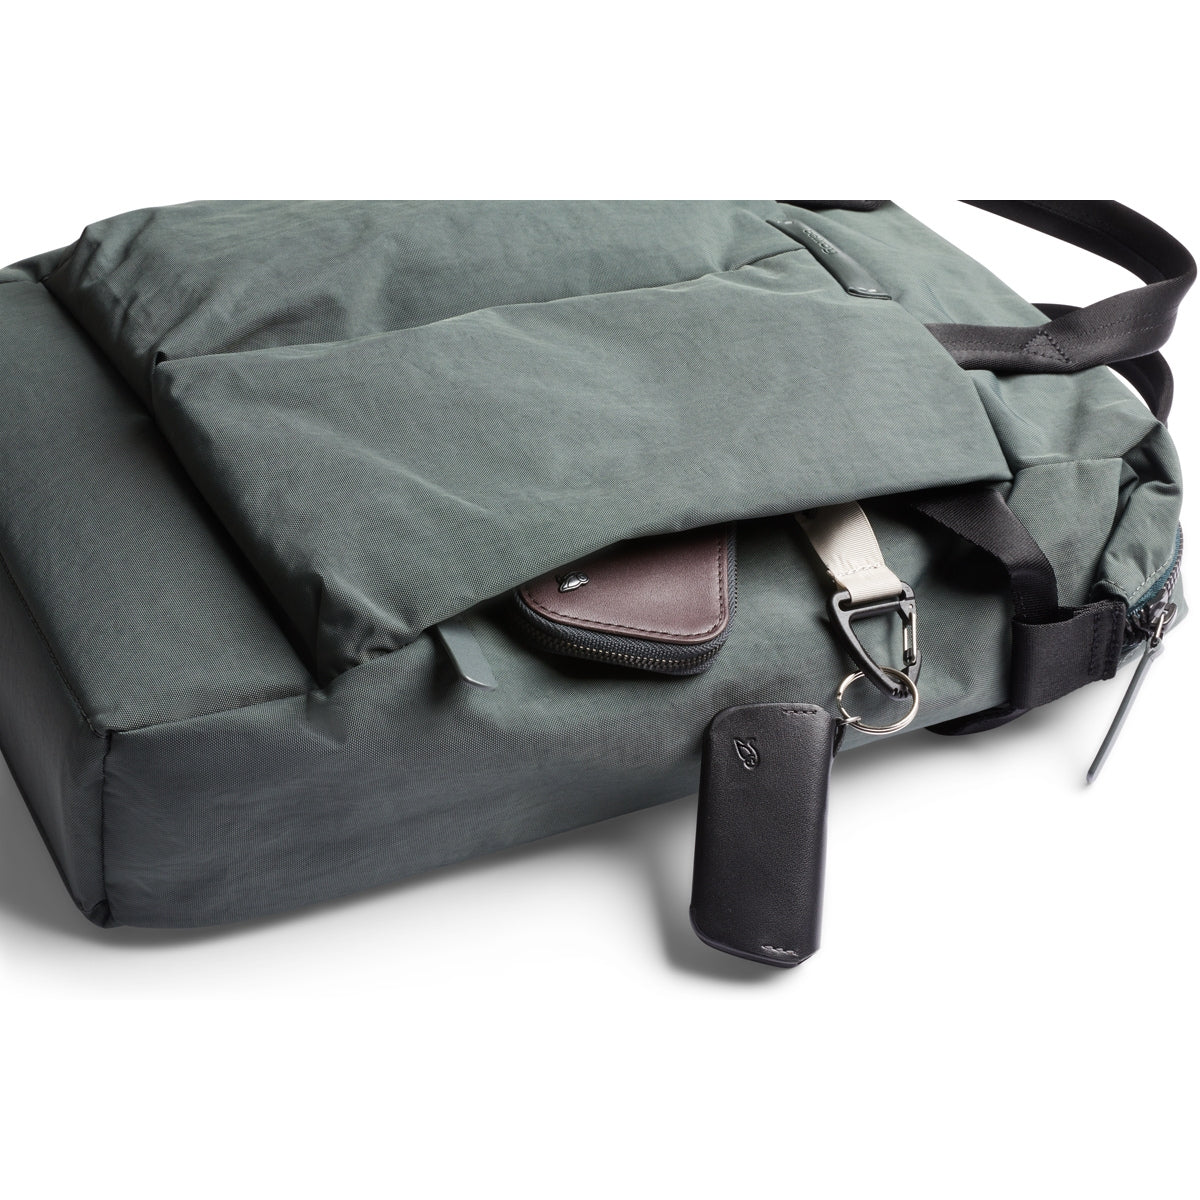 Bellroy Tokyo Totepack Compact in Everglade